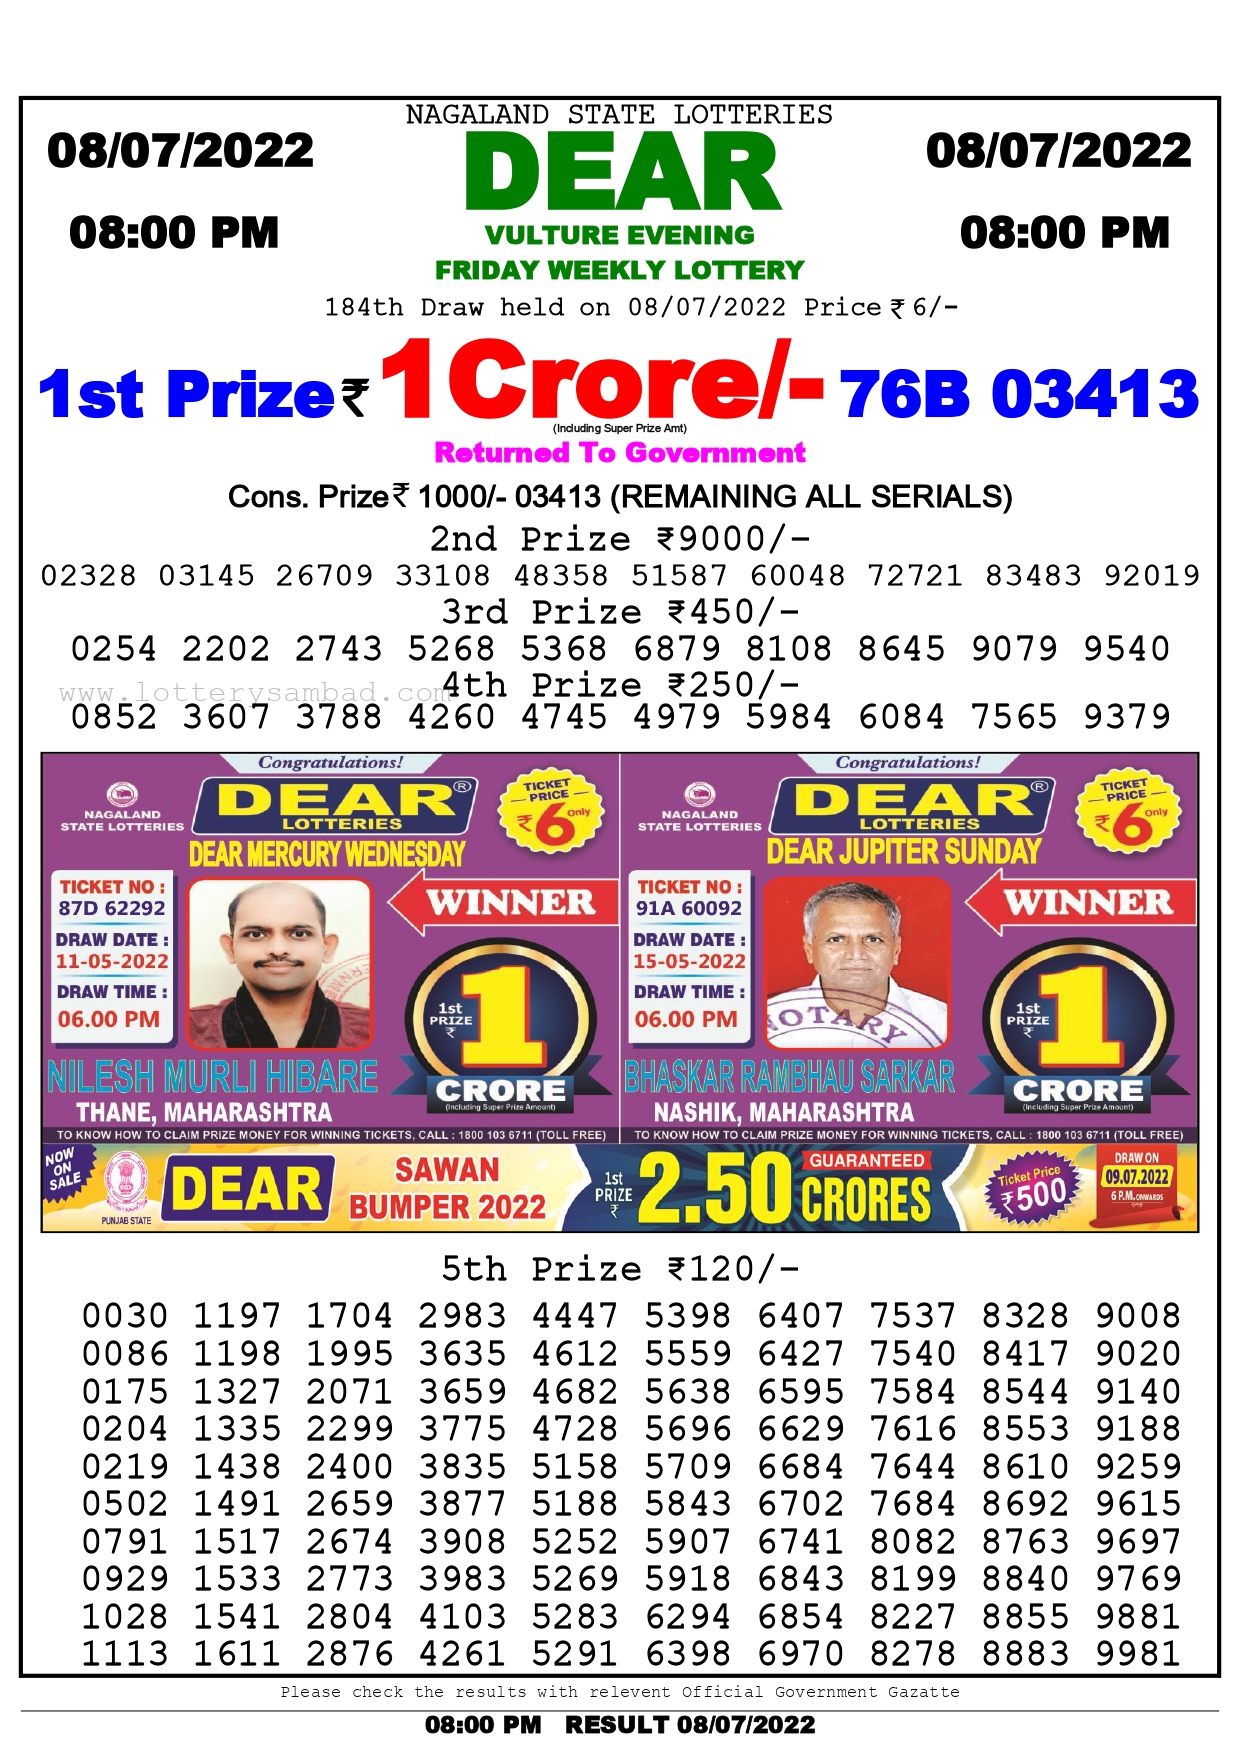 Download Result of Nagaland State Dear 6 Draw 08-07-2022 Draw at 8:00Pm